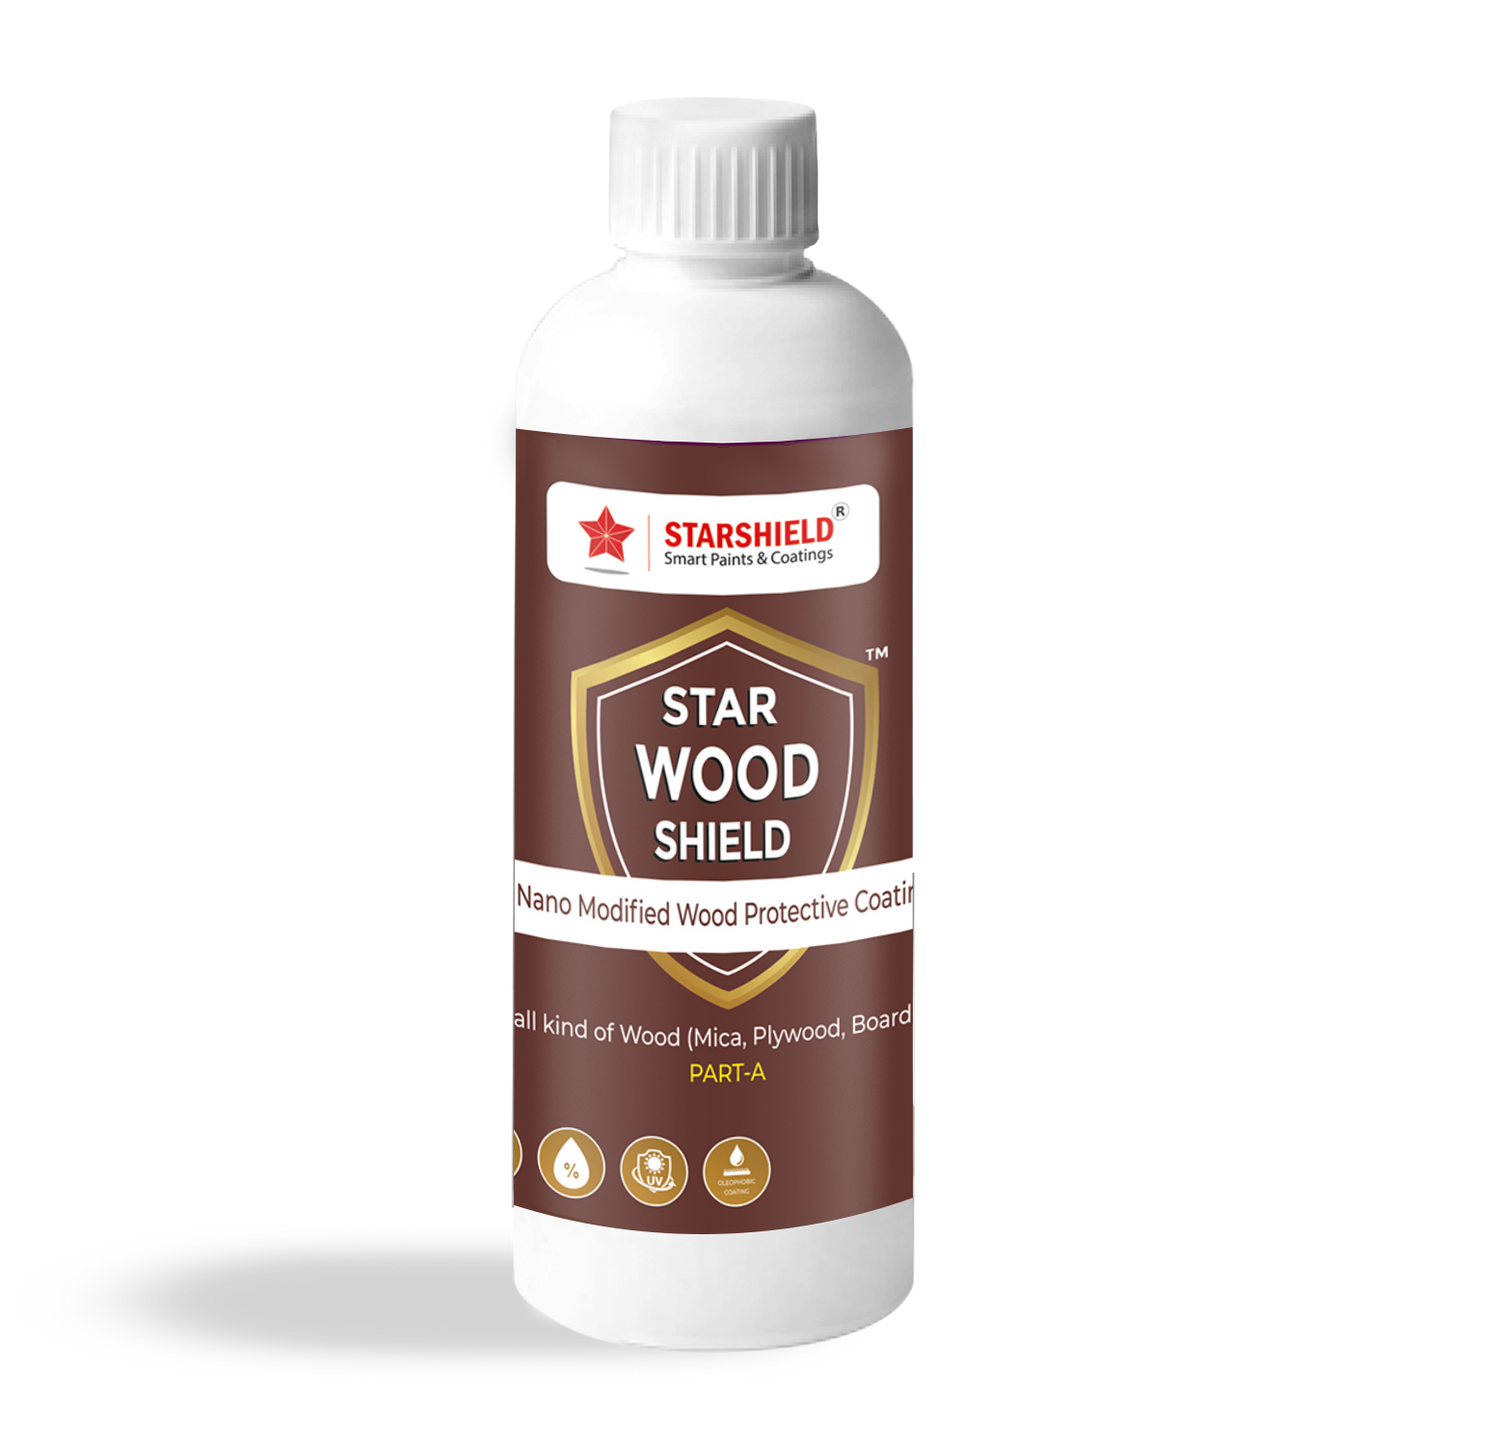 Transform wood surfaces with Star Wood Shield: Long-lasting durability, glossy finish.